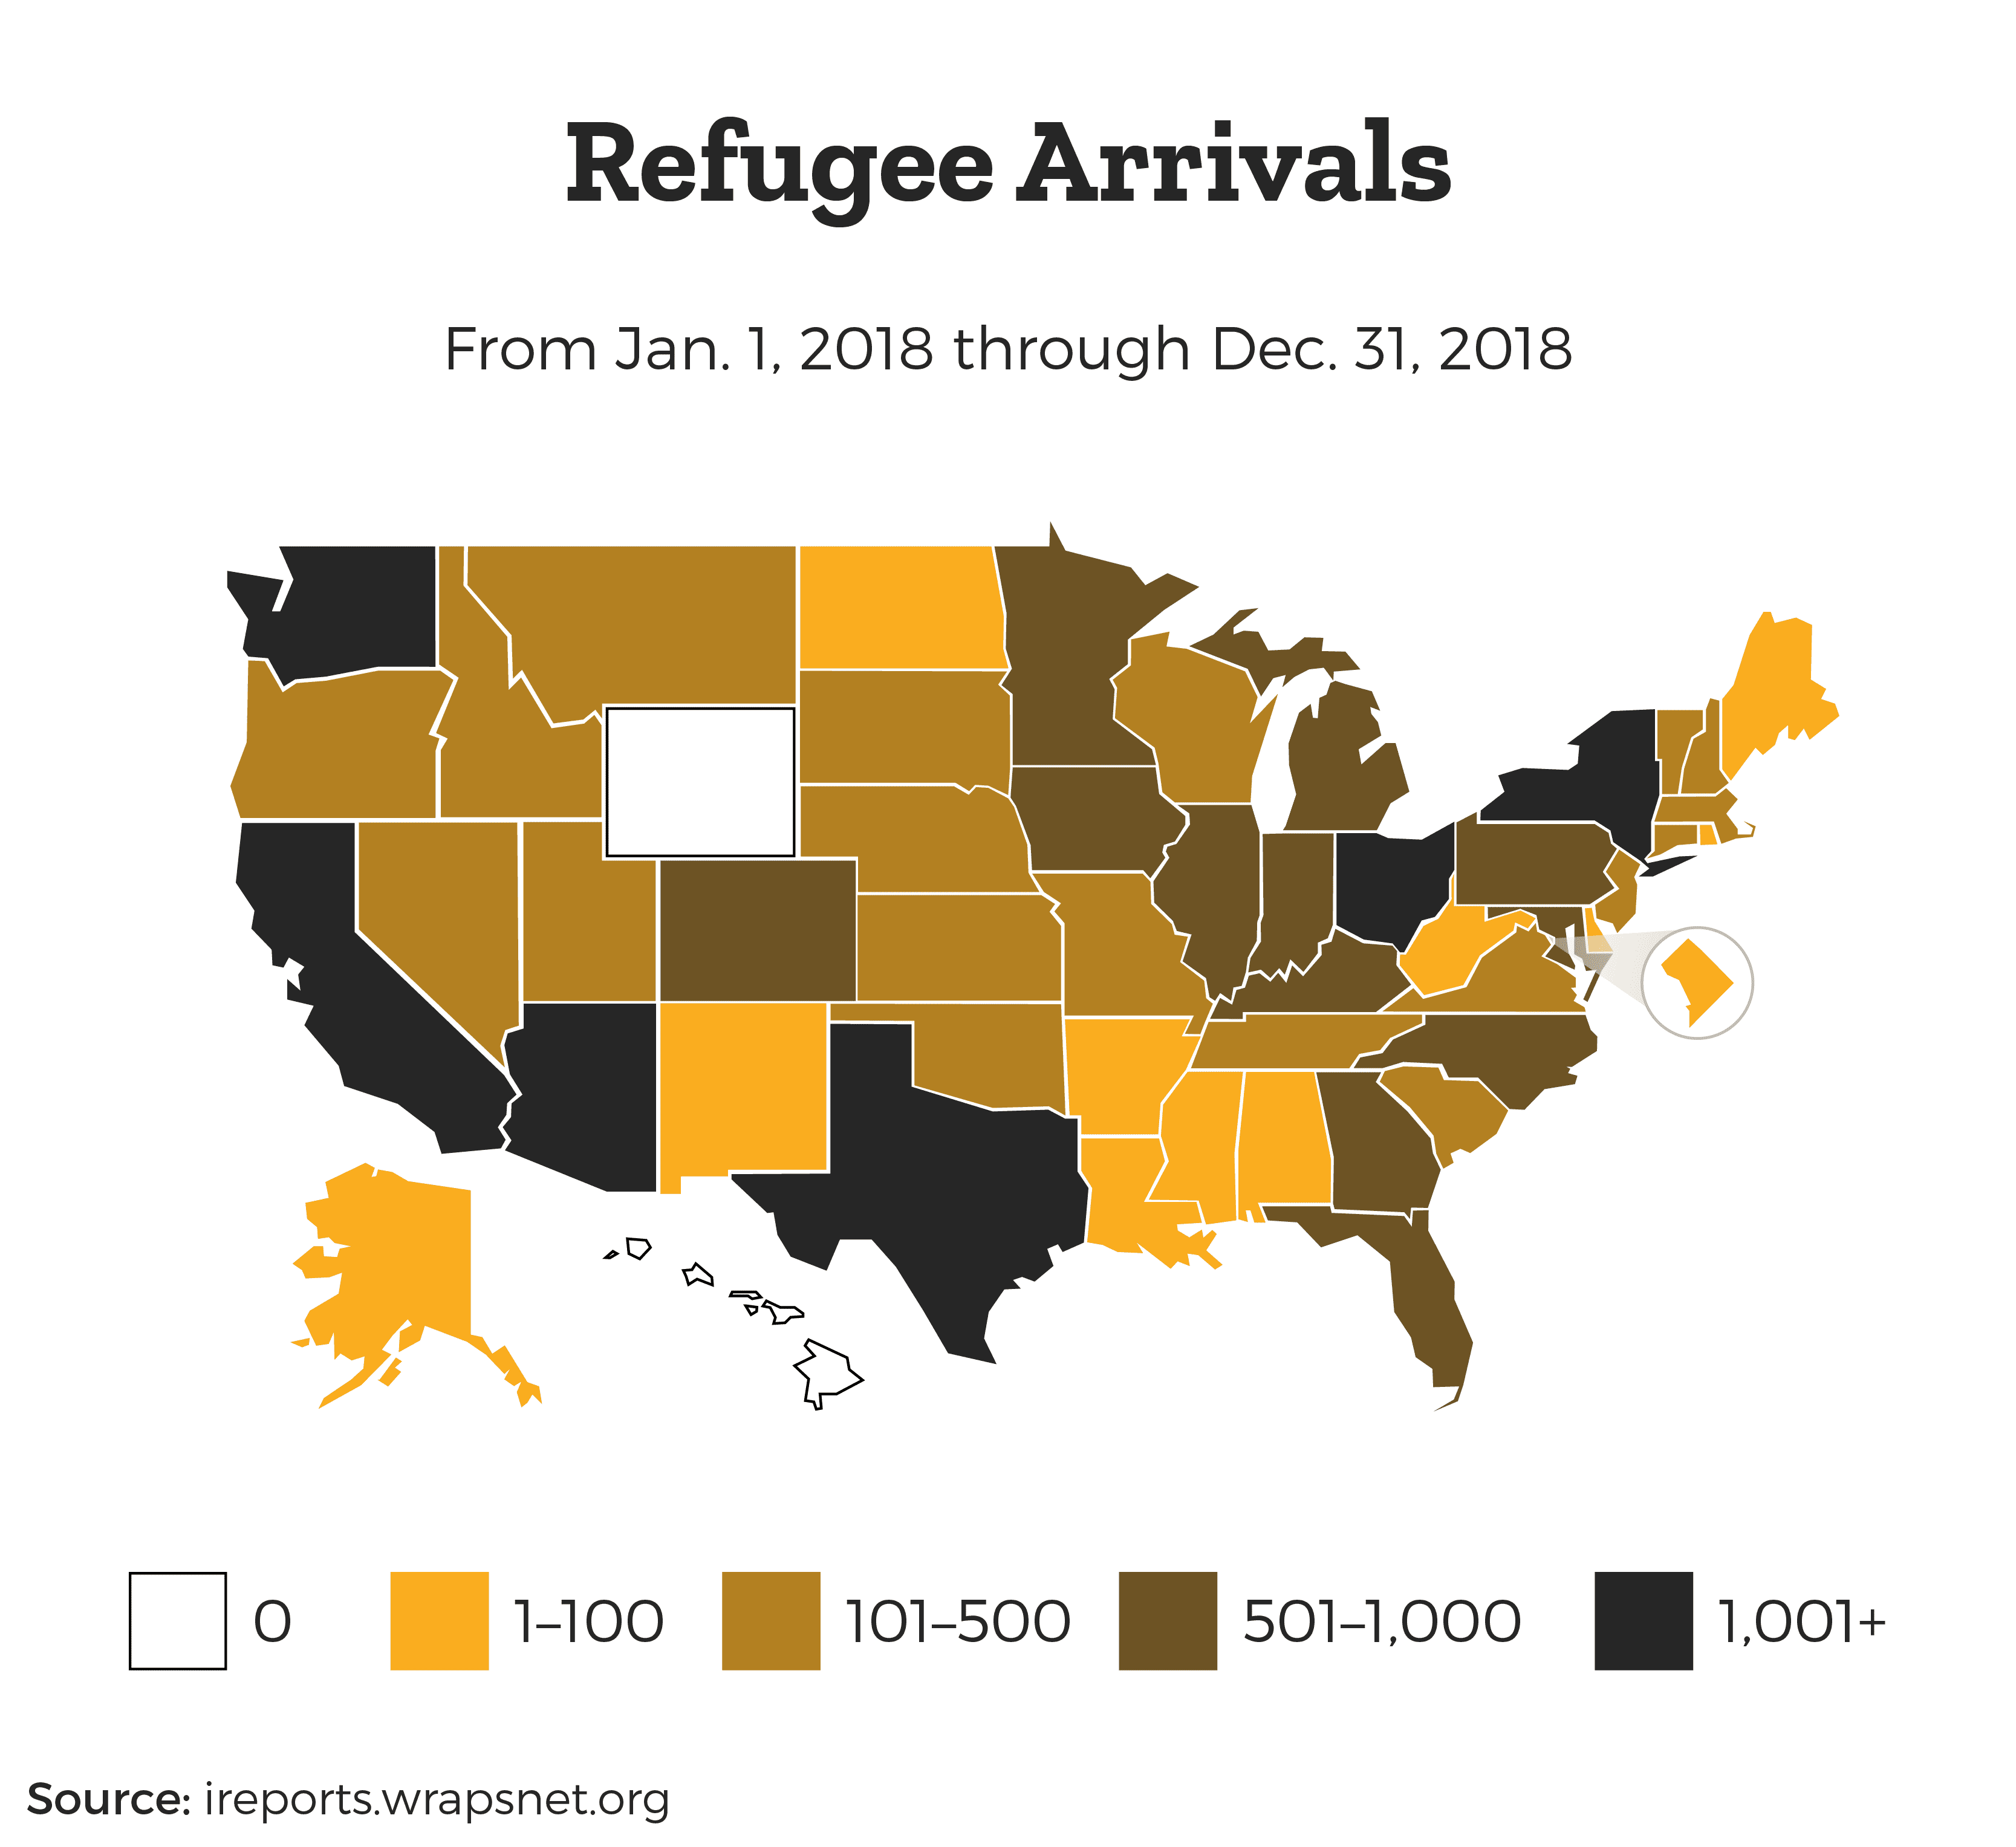 Map of Refugee Arrivals by US State color coded by volume of refugee arrivals